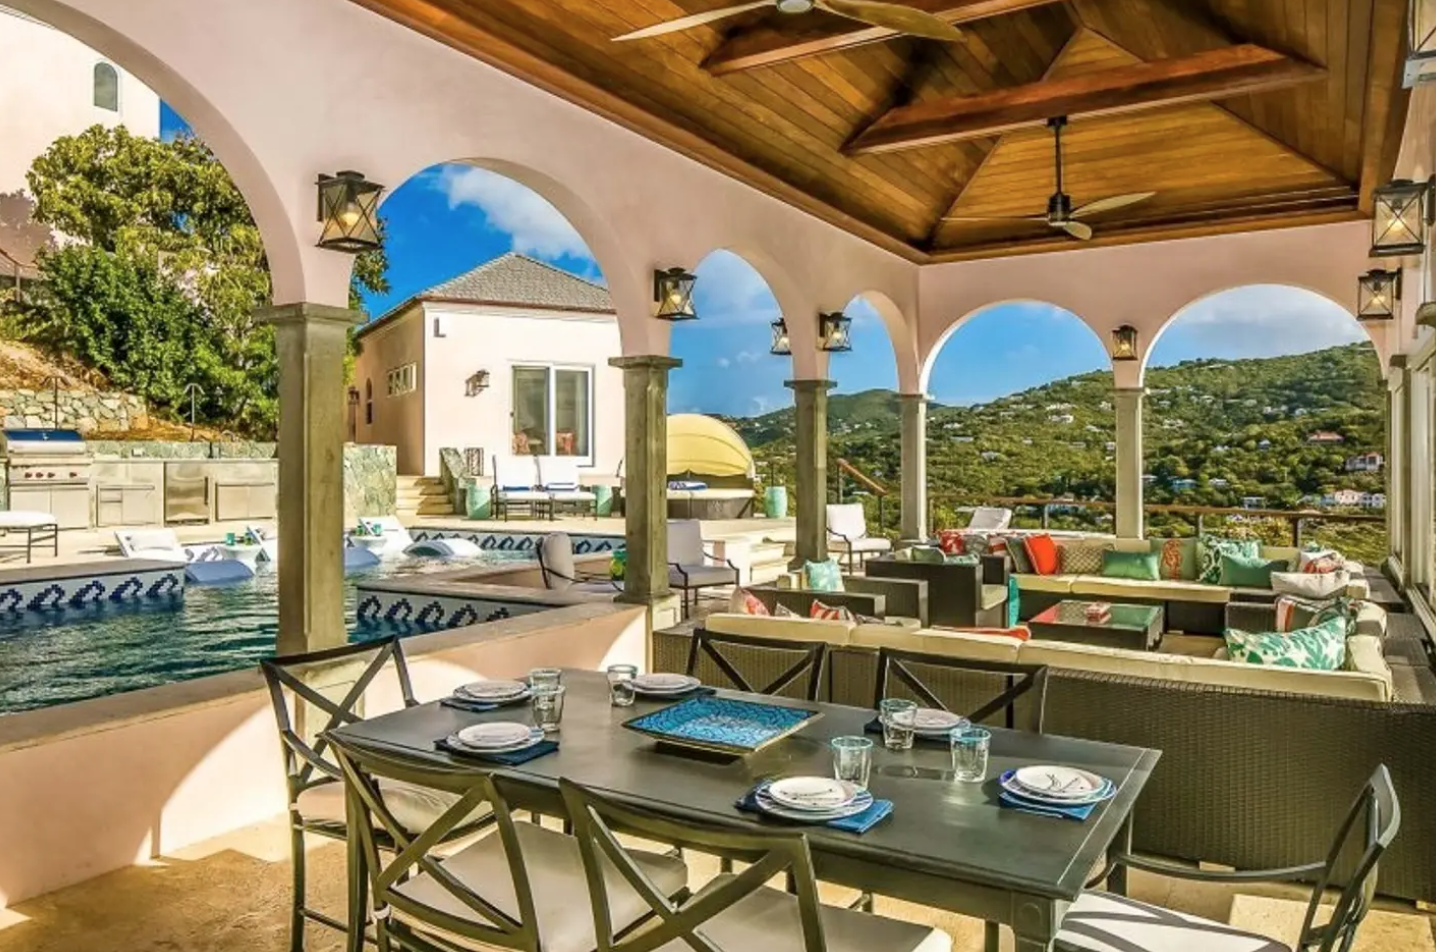 Covered Outdoor Kitchen/Dining/Lounge of "Finisterre" - a two-acre, three-building complex on St. John